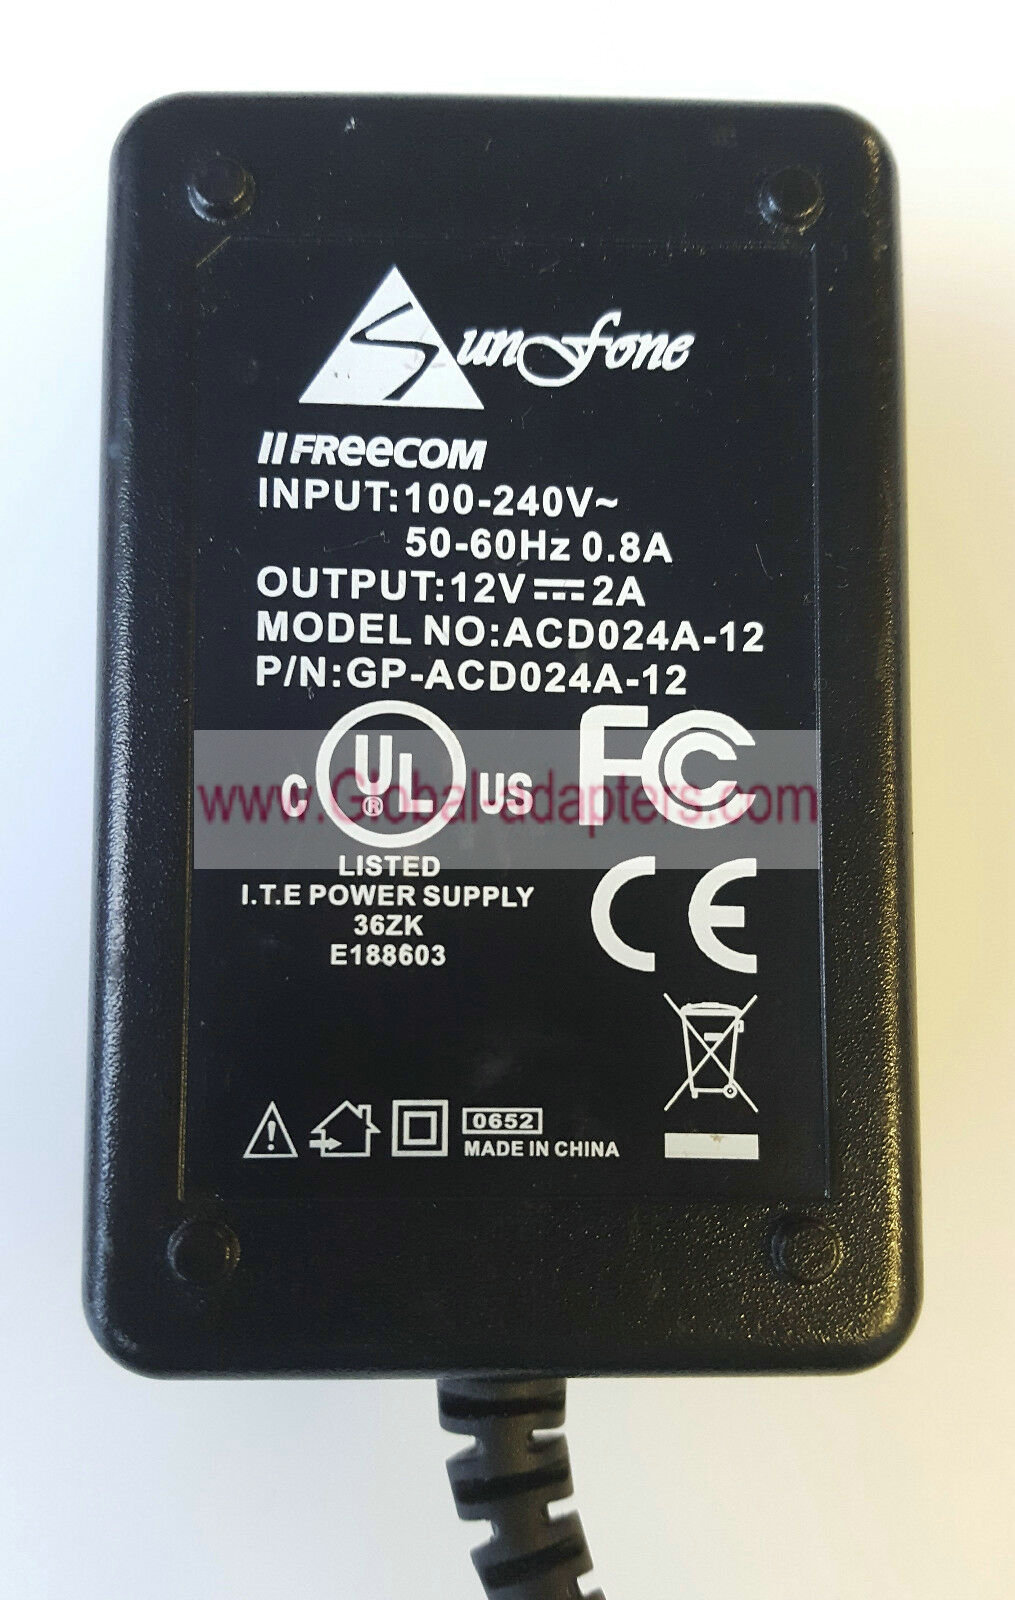 SUNFONE ACD024A-12 GP-ACD024A-12 12V 2.0A AC POWER SUPPLY ADAPTER 5.5 x 2.5mm - Click Image to Close